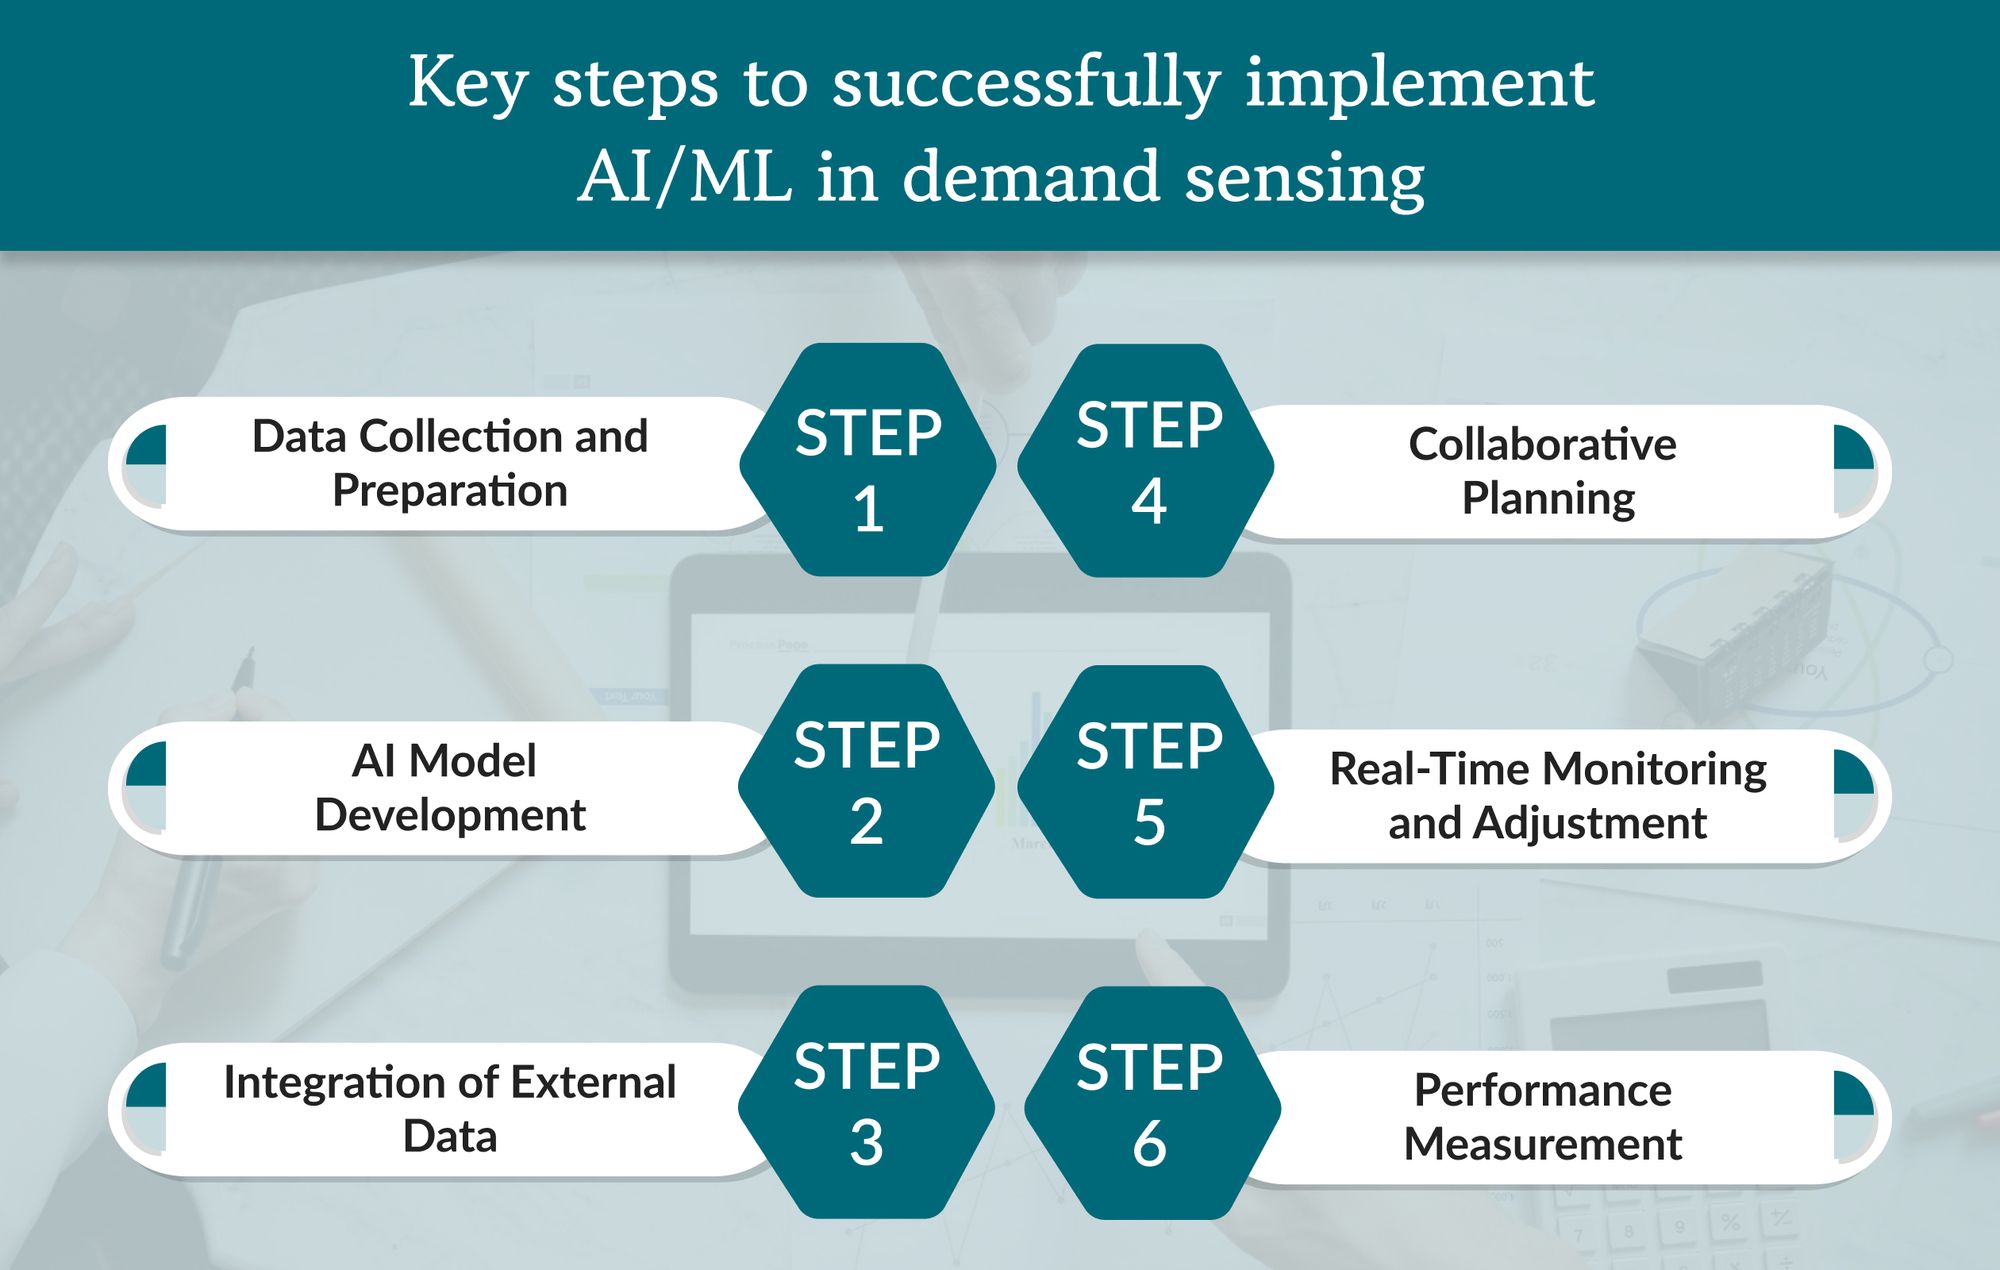 Key steps to successfully implement AI/ML in Demand Sensing